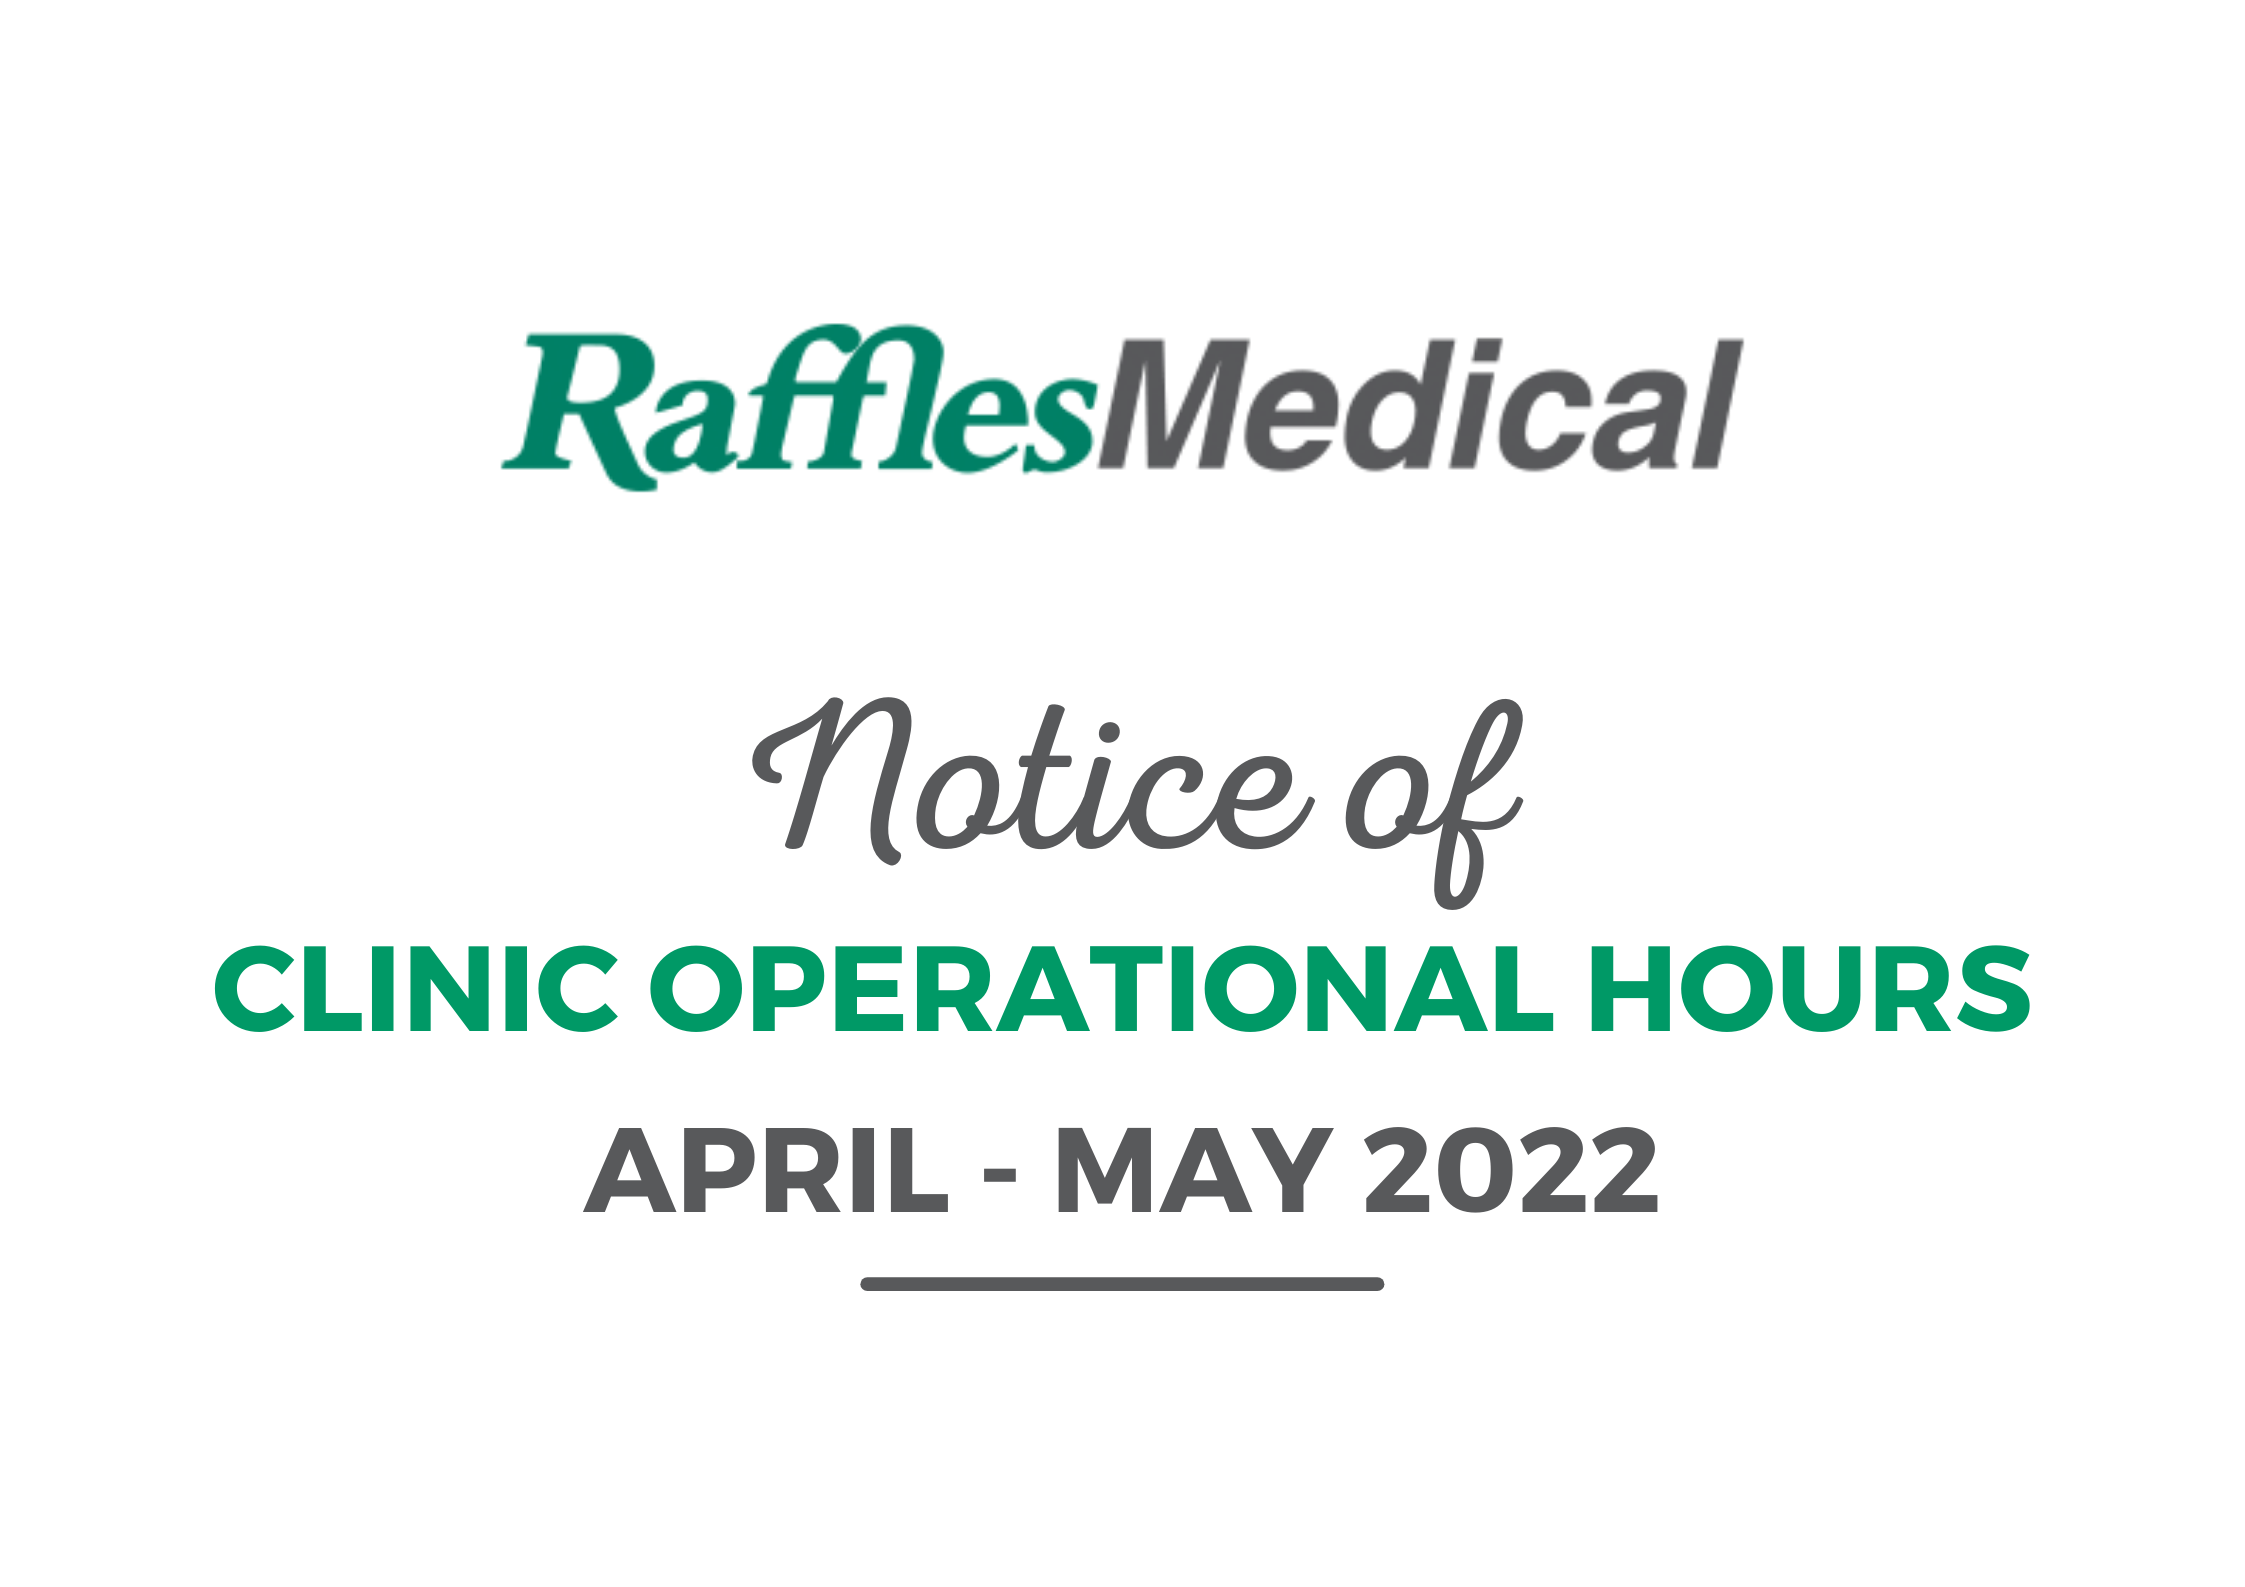 Notice of Clinic Operational Hours | April - May 2022